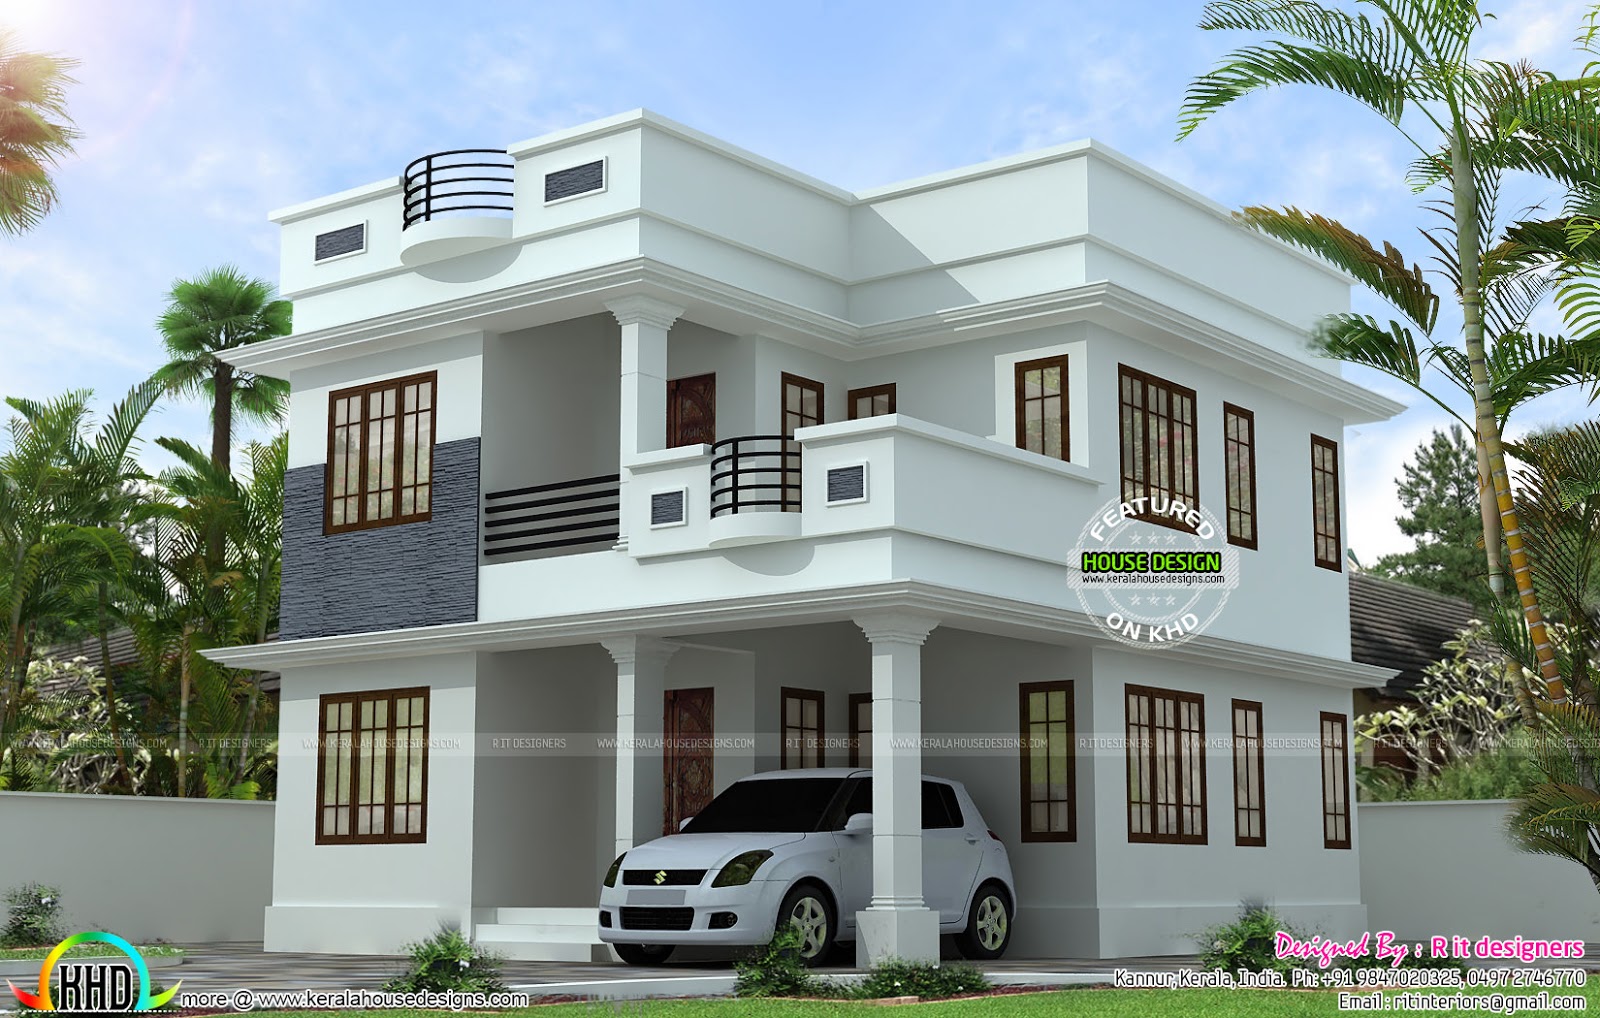 Neat and simple  small house  plan  Kerala home  design and 